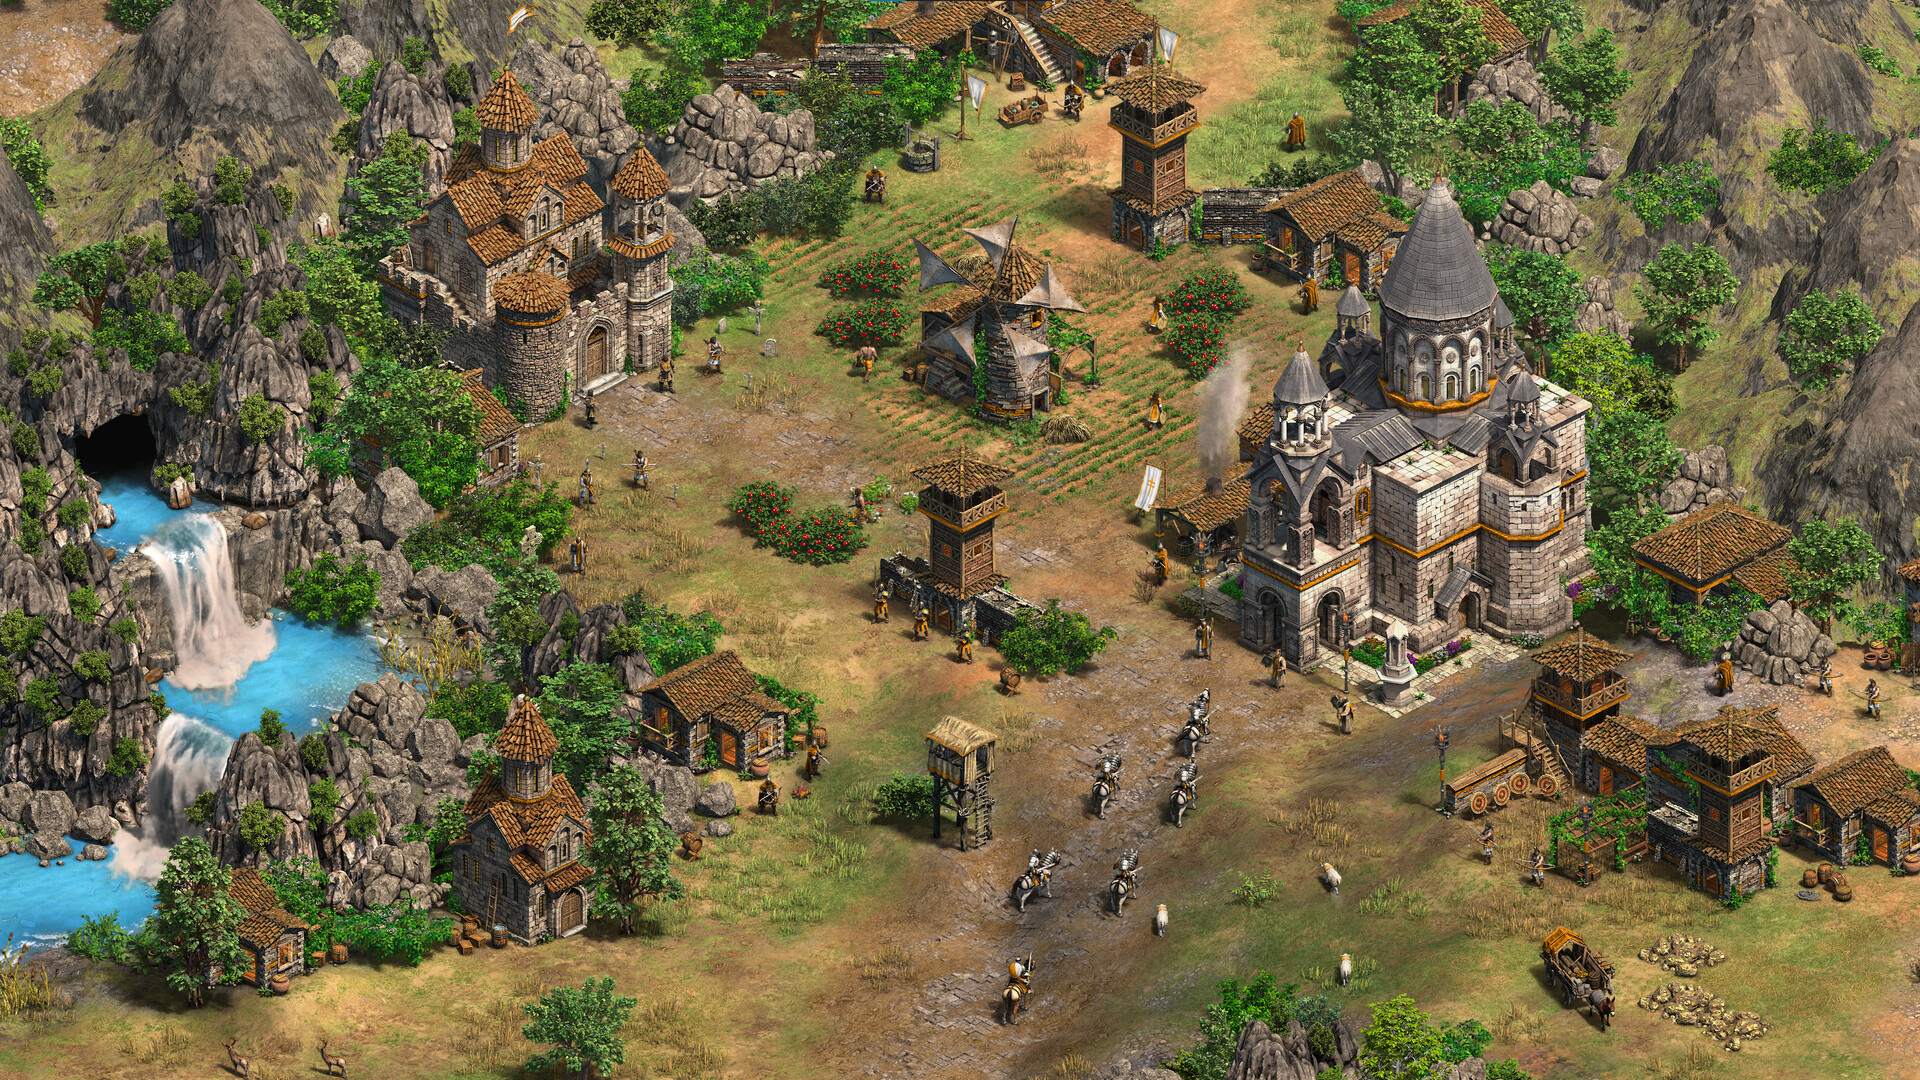 Age of Empires II: Definitive Edition - The Mountain Royals Featured Screenshot #1